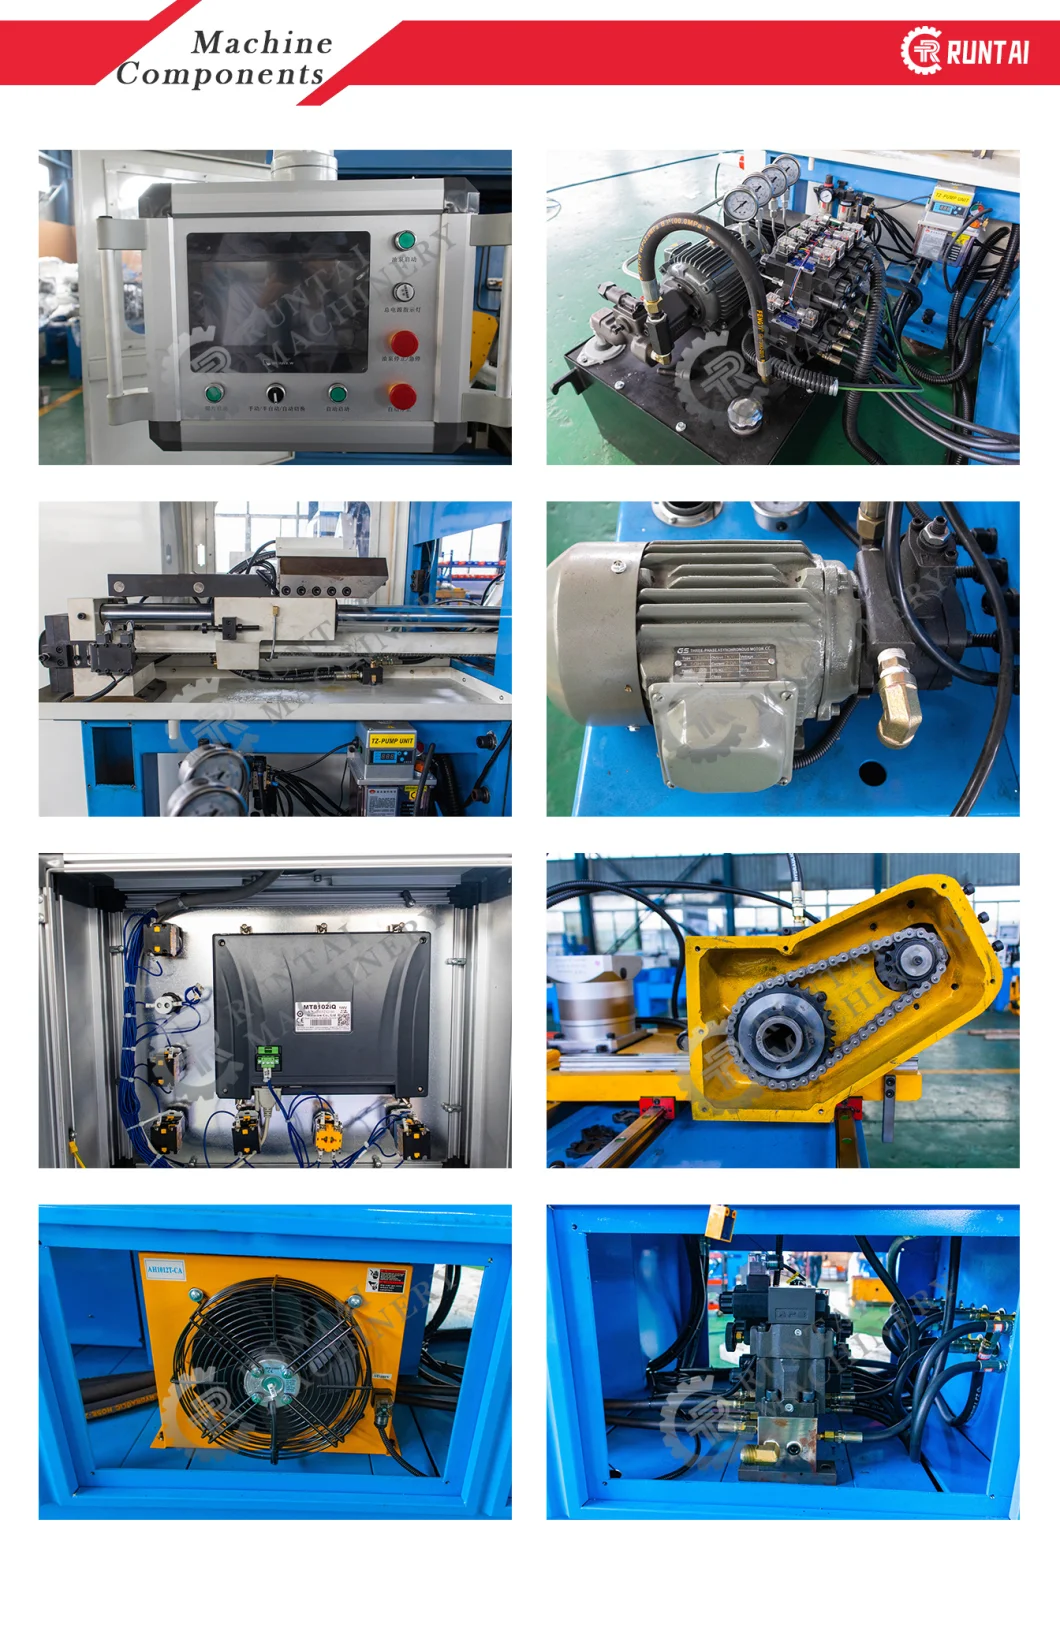 38CNC Manufacturer Exhaust Hydraulic Pipe Bending Machine with Good Price